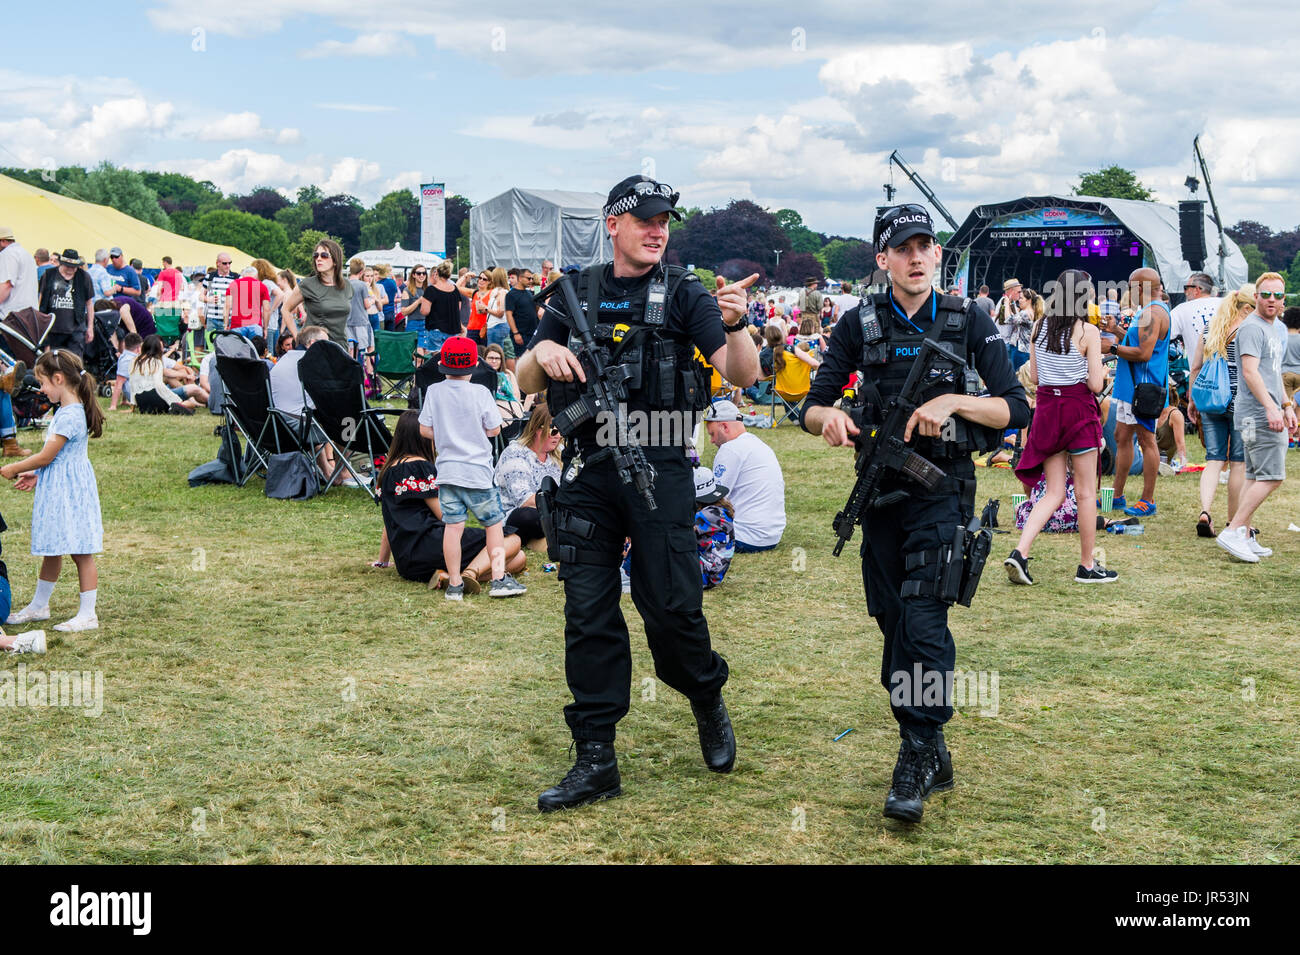 Armed Police patrol Coventry Godiva Music Festival, Coventry, UK in response to the spate of recent terrorist attacks in the UK, Great Britain. Stock Photo